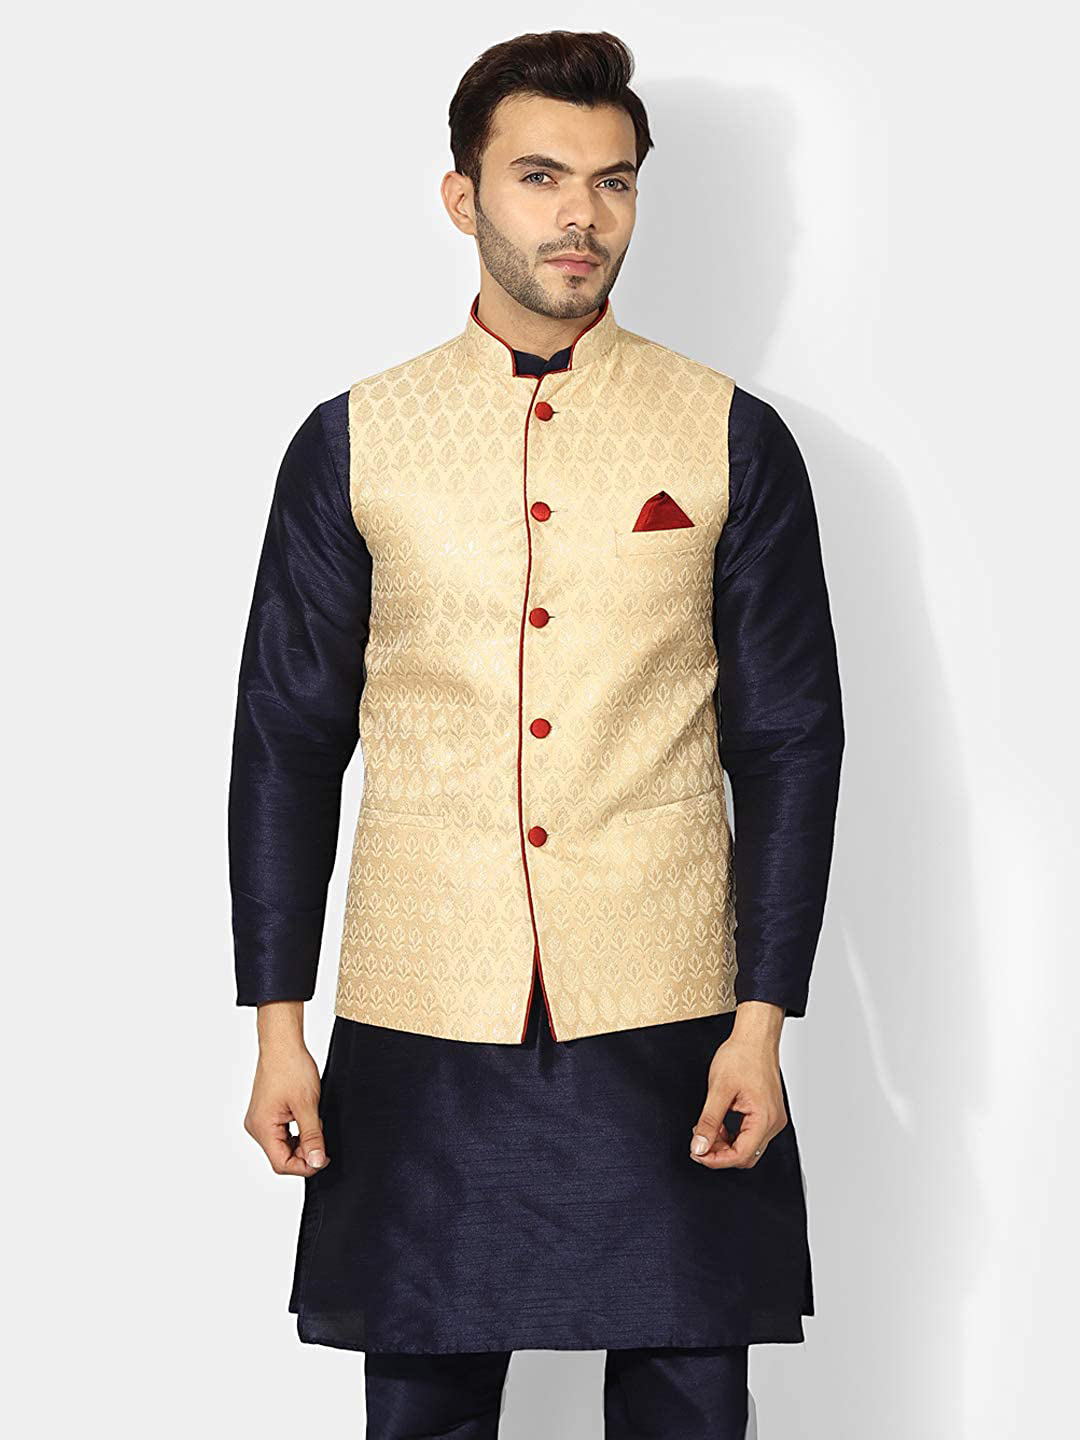 Ethnic Wear For Mens | Rarestyles